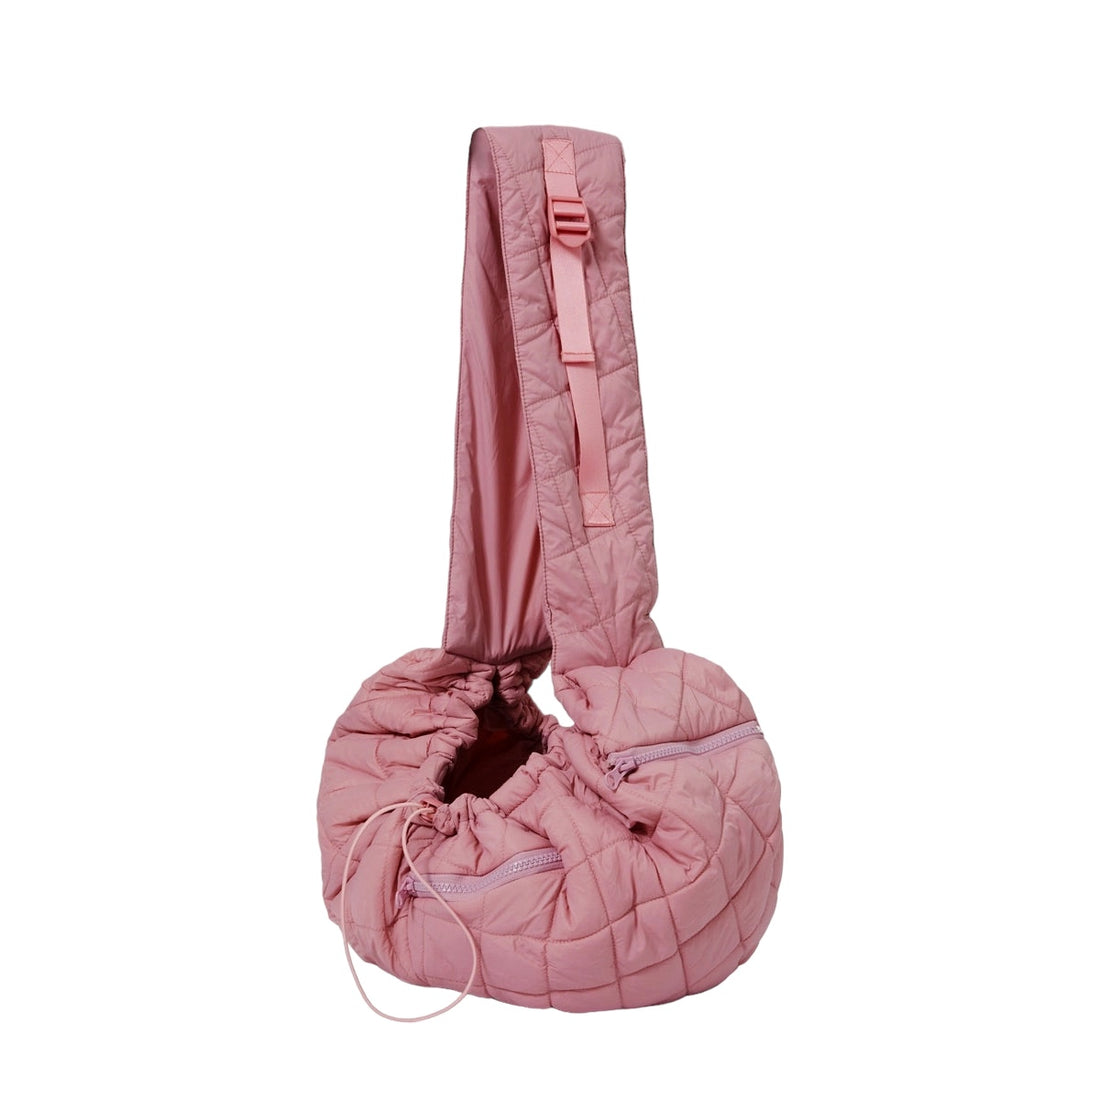 Eco Packable Sling Carrier - Berry Blush